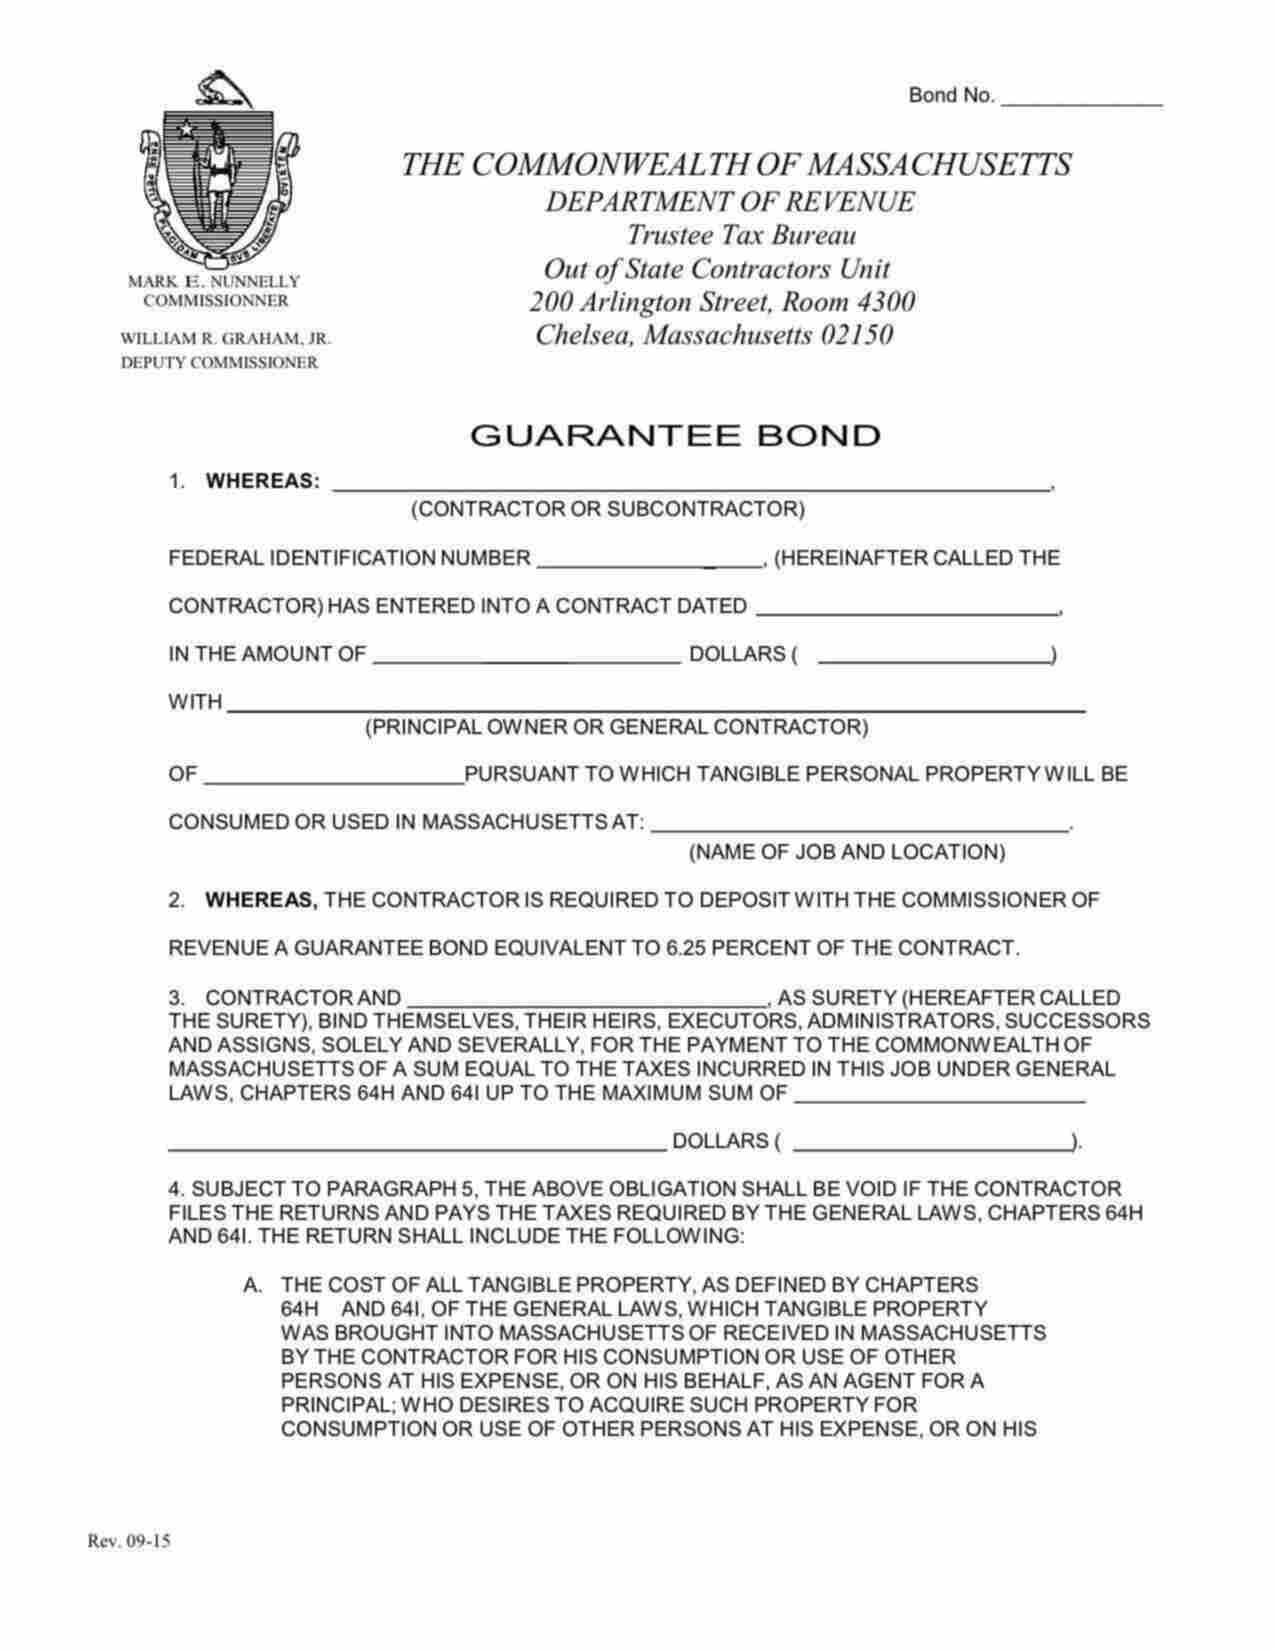 Massachusetts Out-of-State (Nonresident) Contractors Guarantee Bond Form